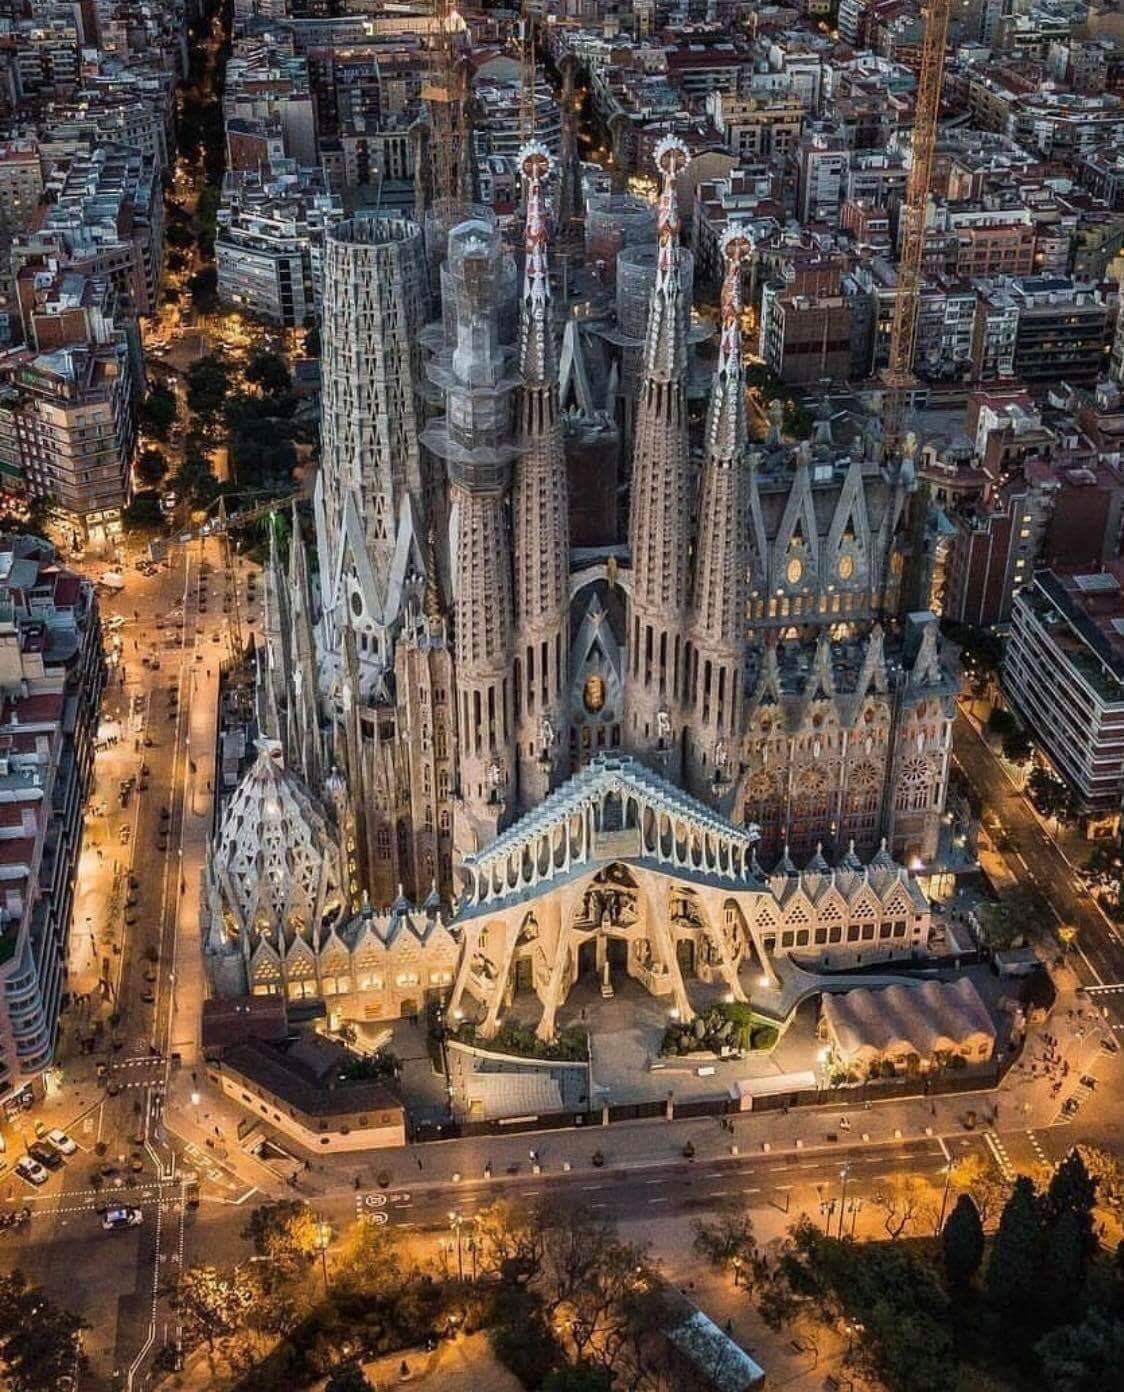 The Basílica de la Sagrada Família - Barcelona, Spain - Architect Antoni Gaudi's masterpiece began in 1882 combining Spanish Late Gothic, Catalan Modernism and curvilinear Art Nouveau styles - Gaudí (1852–1926) is buried in the Basilica crypt - Expected completion in 2026